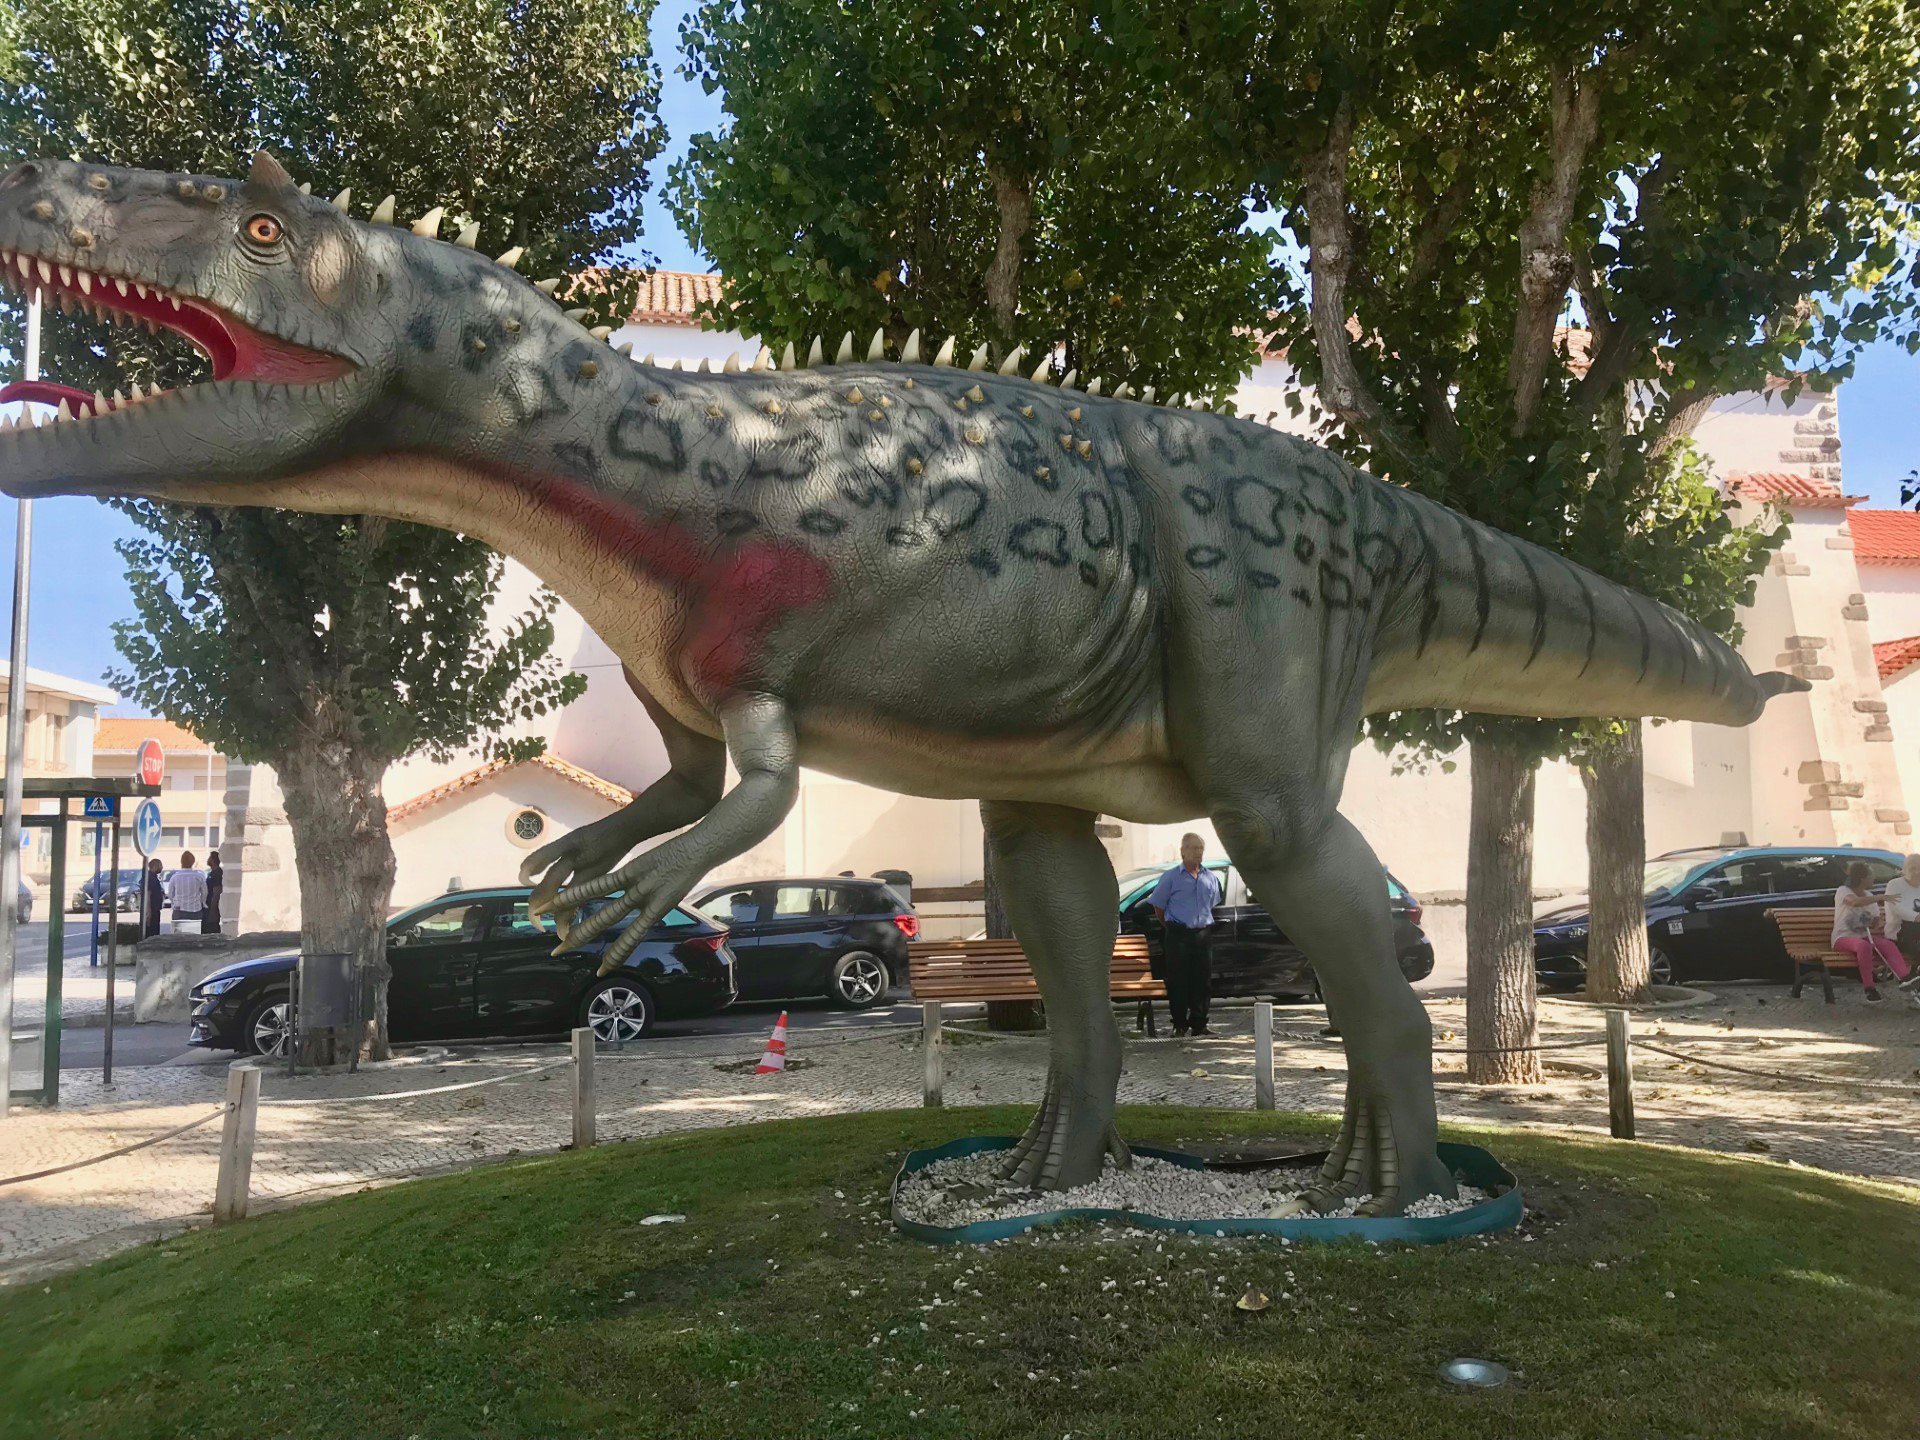 Lourinhanosaurus gets its name from the area in Portugal where it was found. It grew 3m tall and...